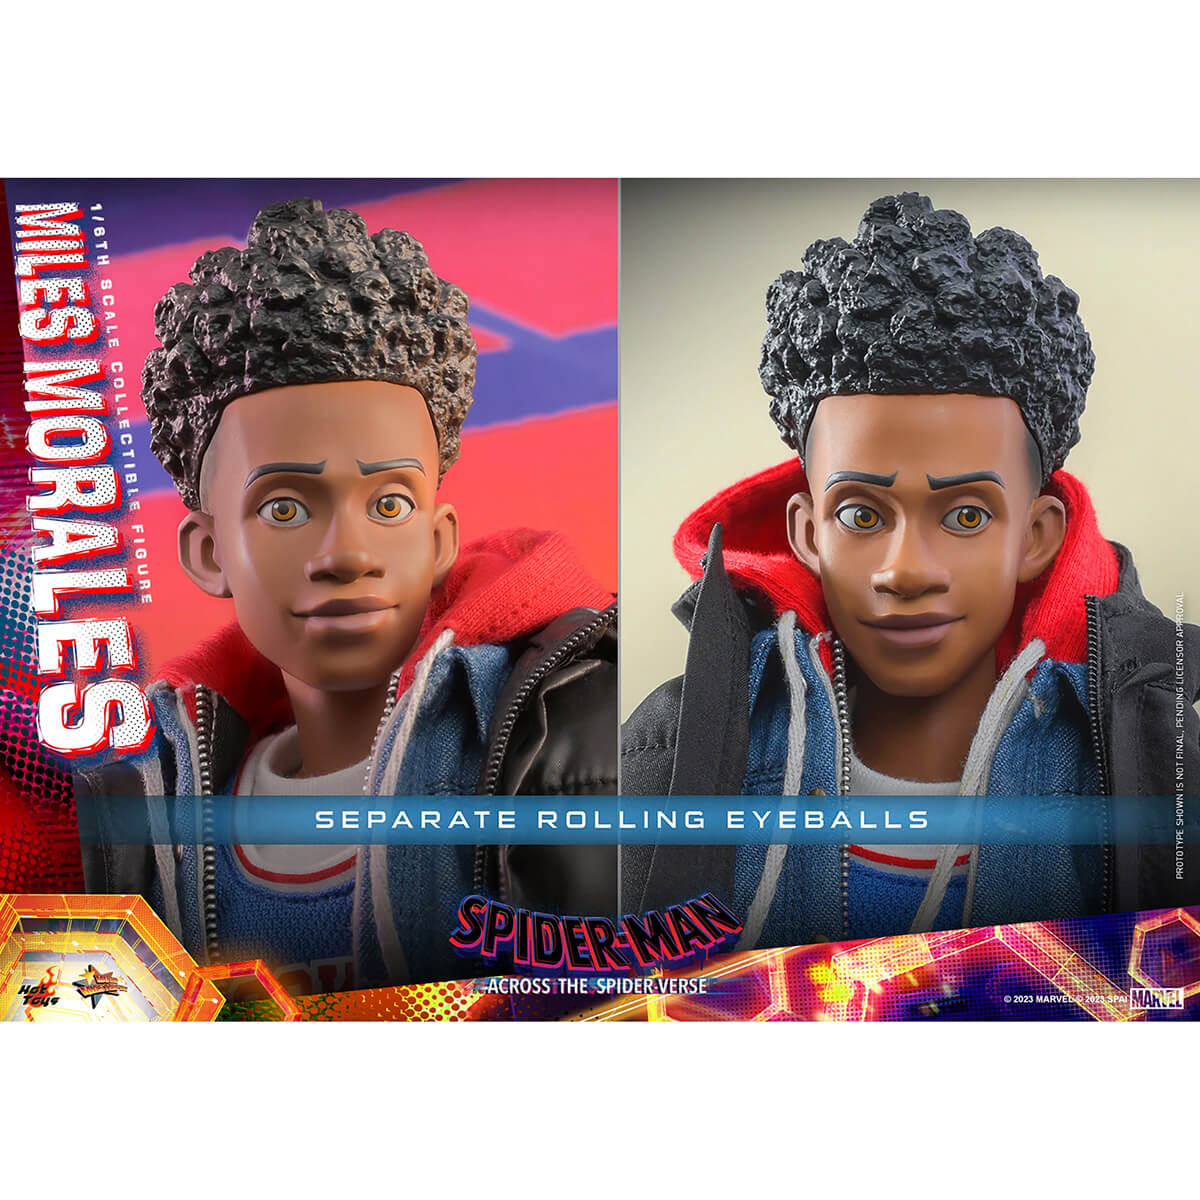 The Hot Toys Miles Morales Sixth Scale Figure features separate rolling eyeballs.